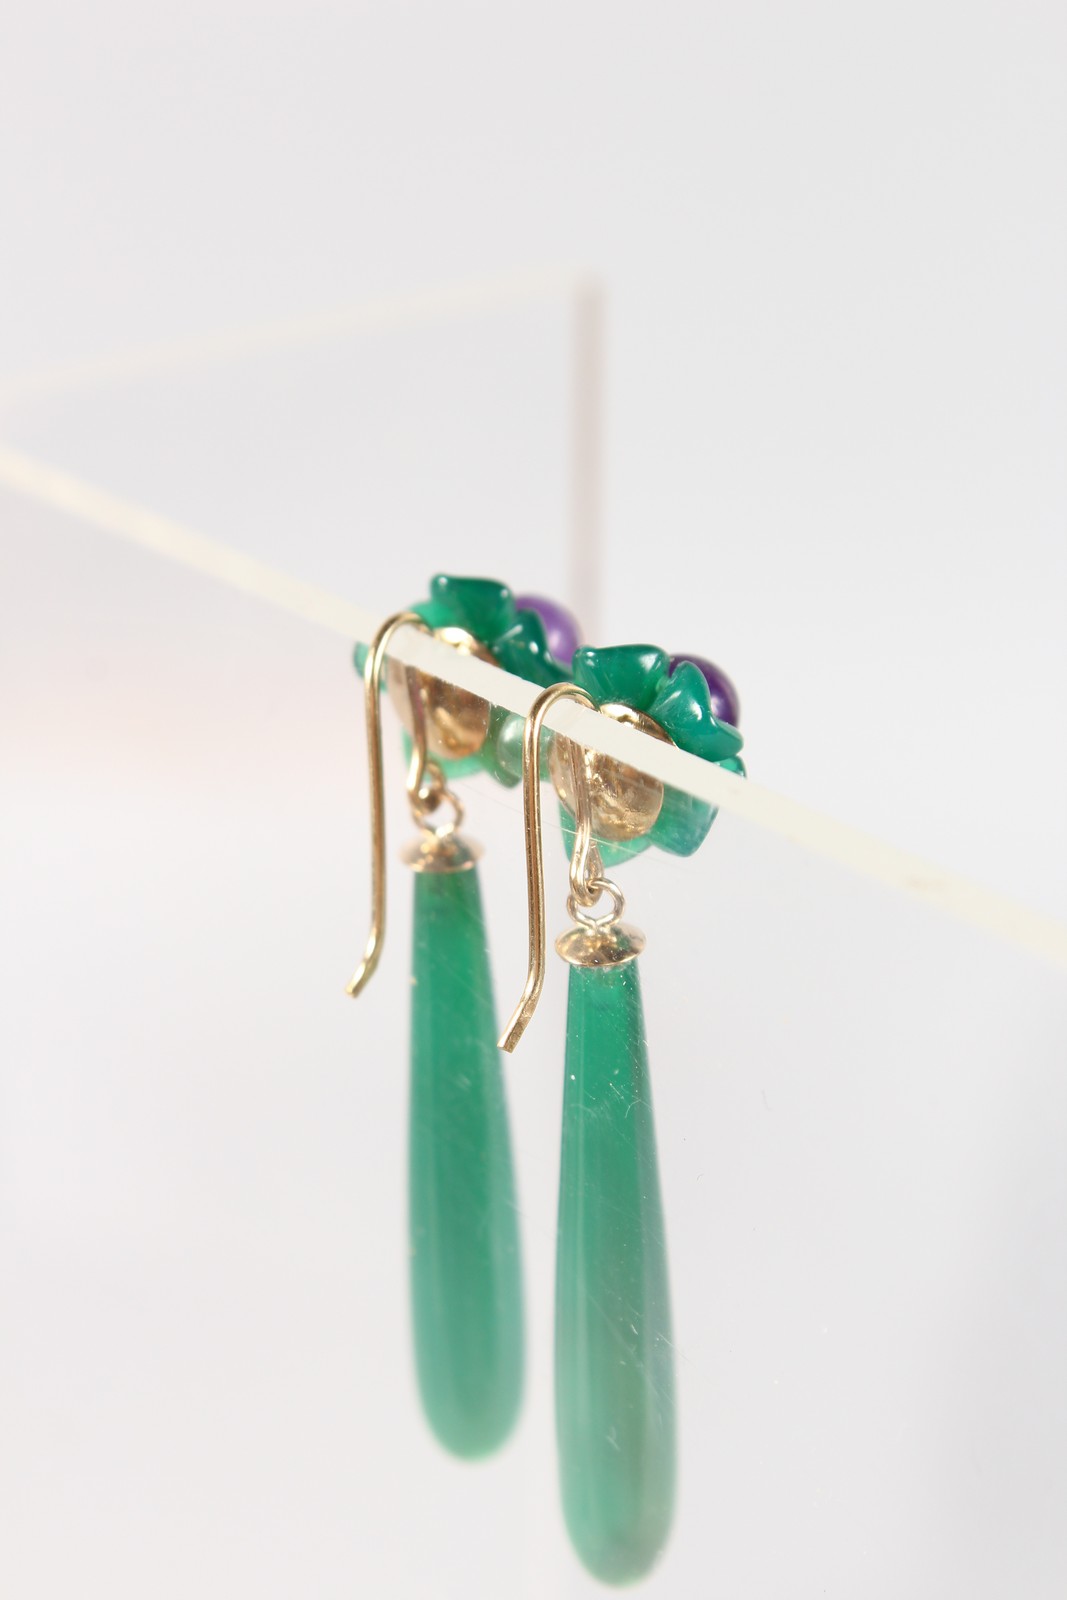 A PAIR OF 9CT GOLD, JADE AND AMETHYST DROP EARRINGS. - Image 2 of 2